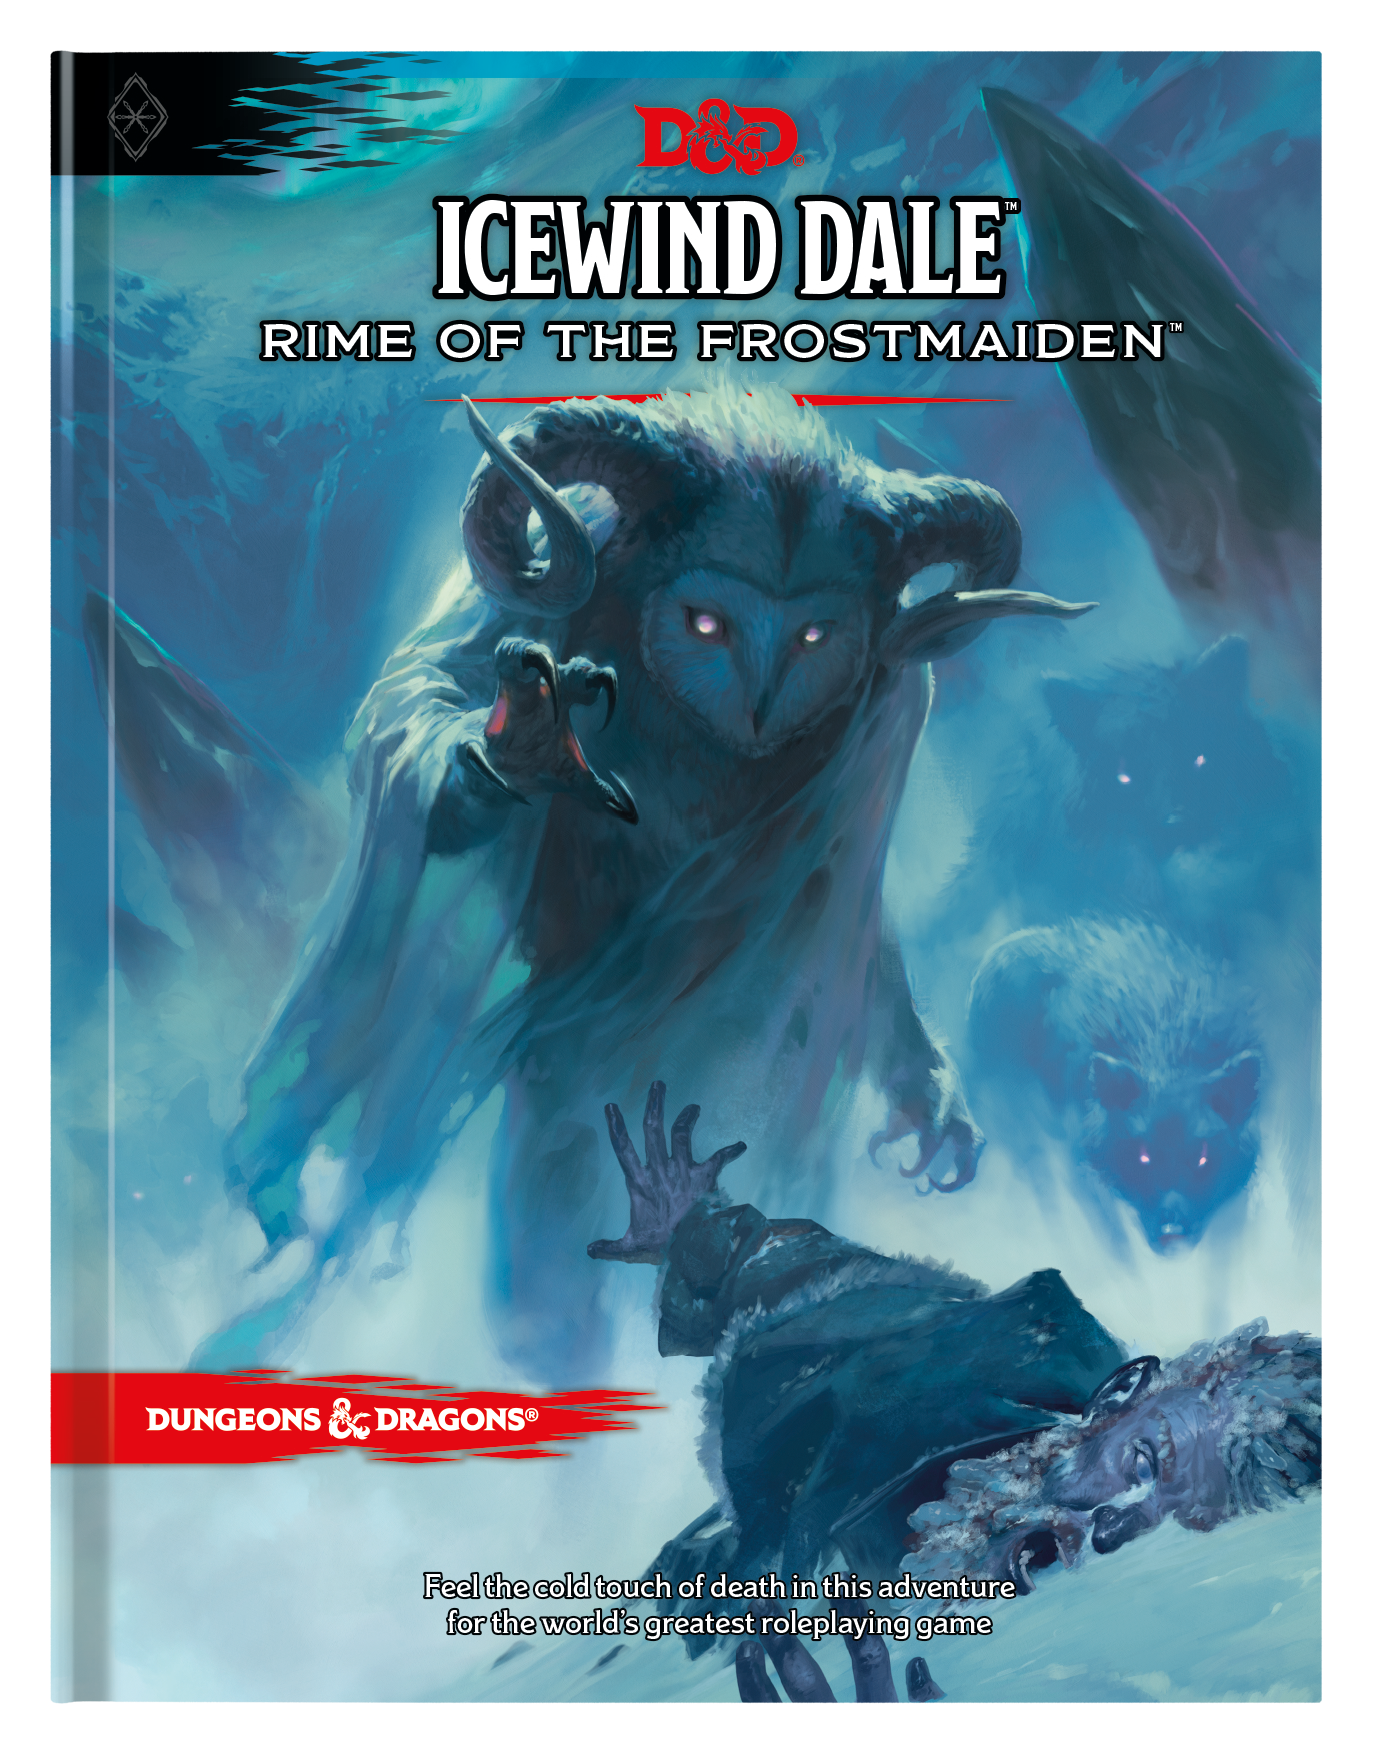 Cover art of Icewind Dale: Rime of the Frostmaiden